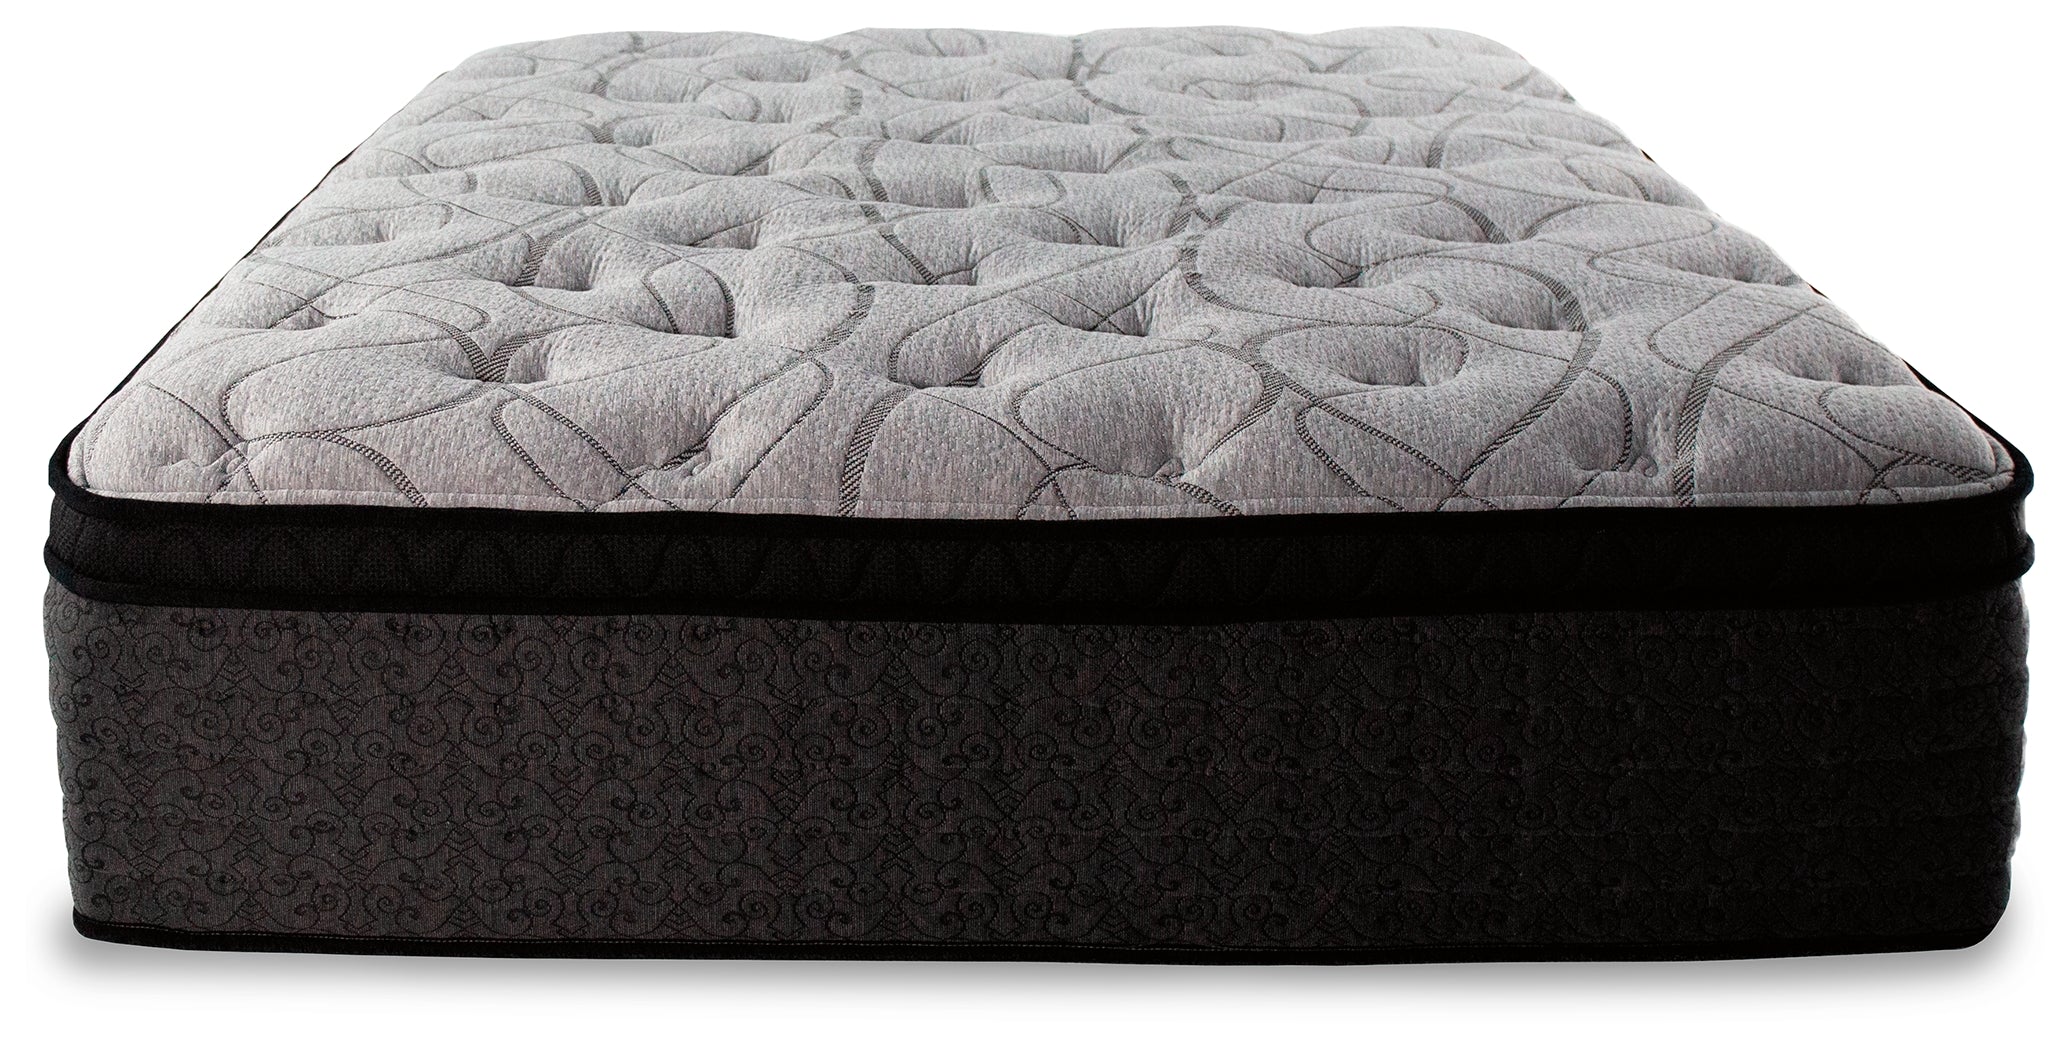 Hybrid 1600 King Mattress with Head-Foot Model Best King Adjustable Base - furniture place usa